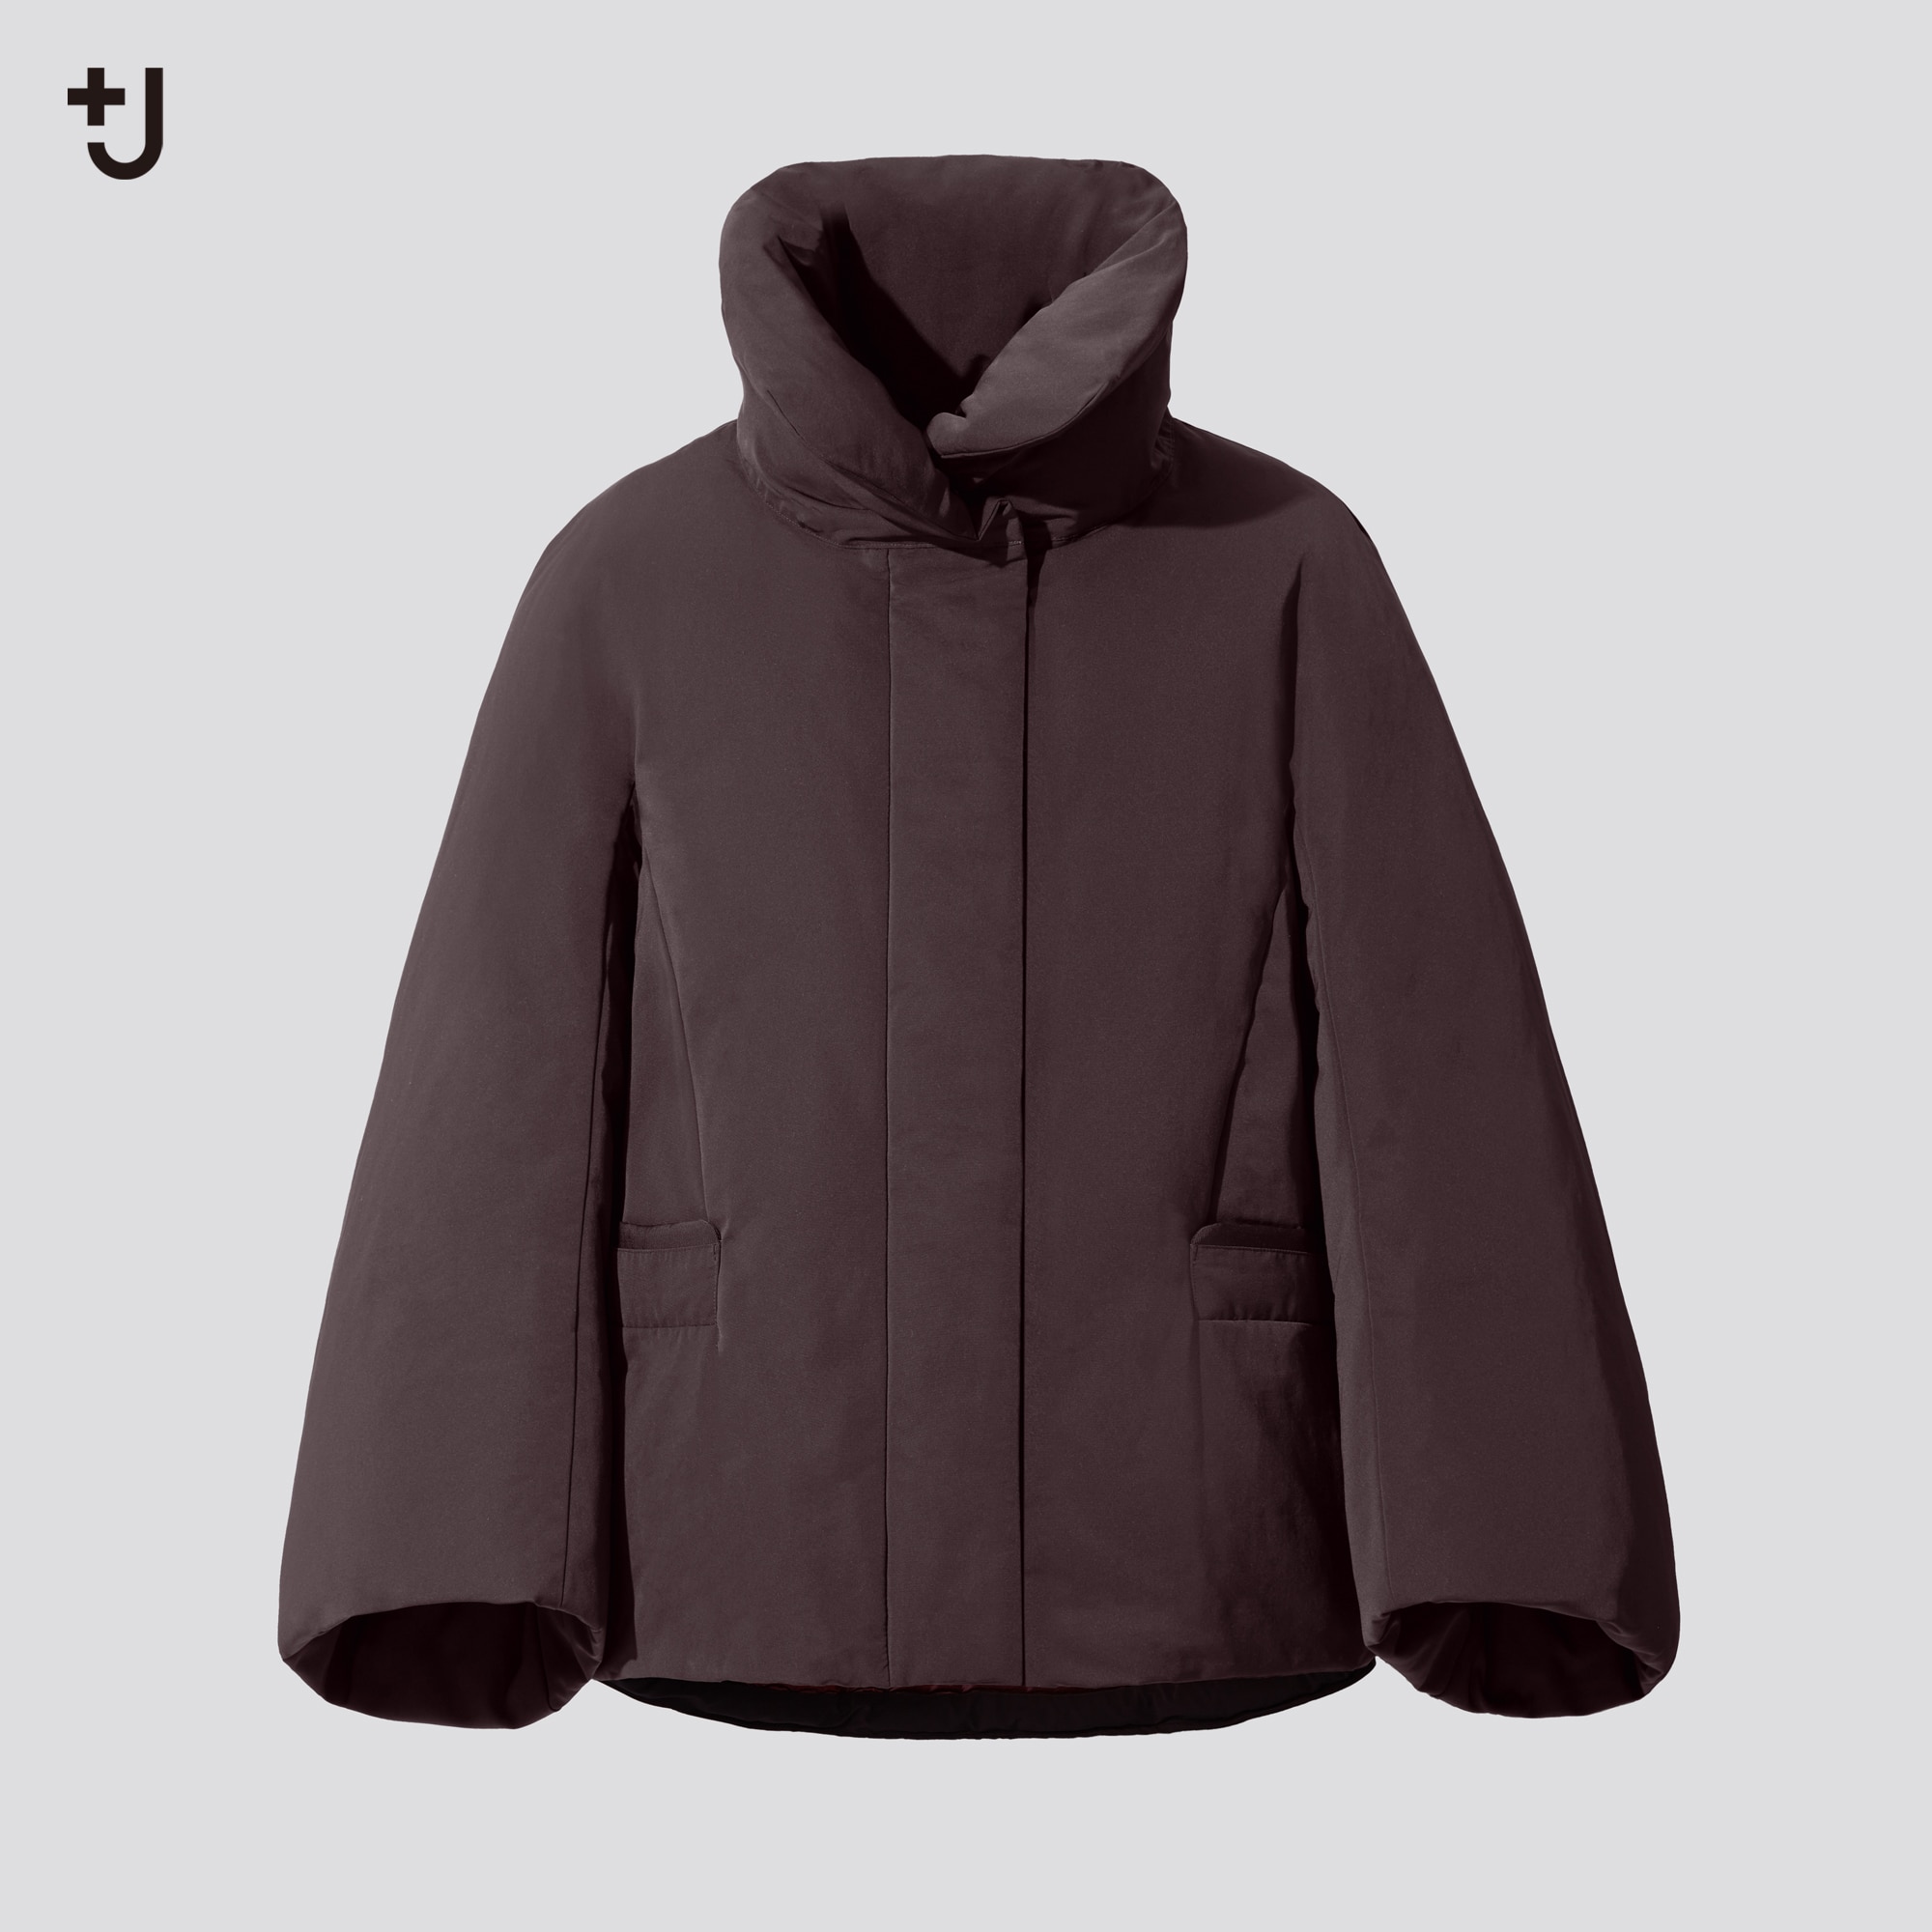 Jil Sander Uniqlo Puffer Mens Blazer  Jacket Mens Fashion Coats  Jackets and Outerwear on Carousell